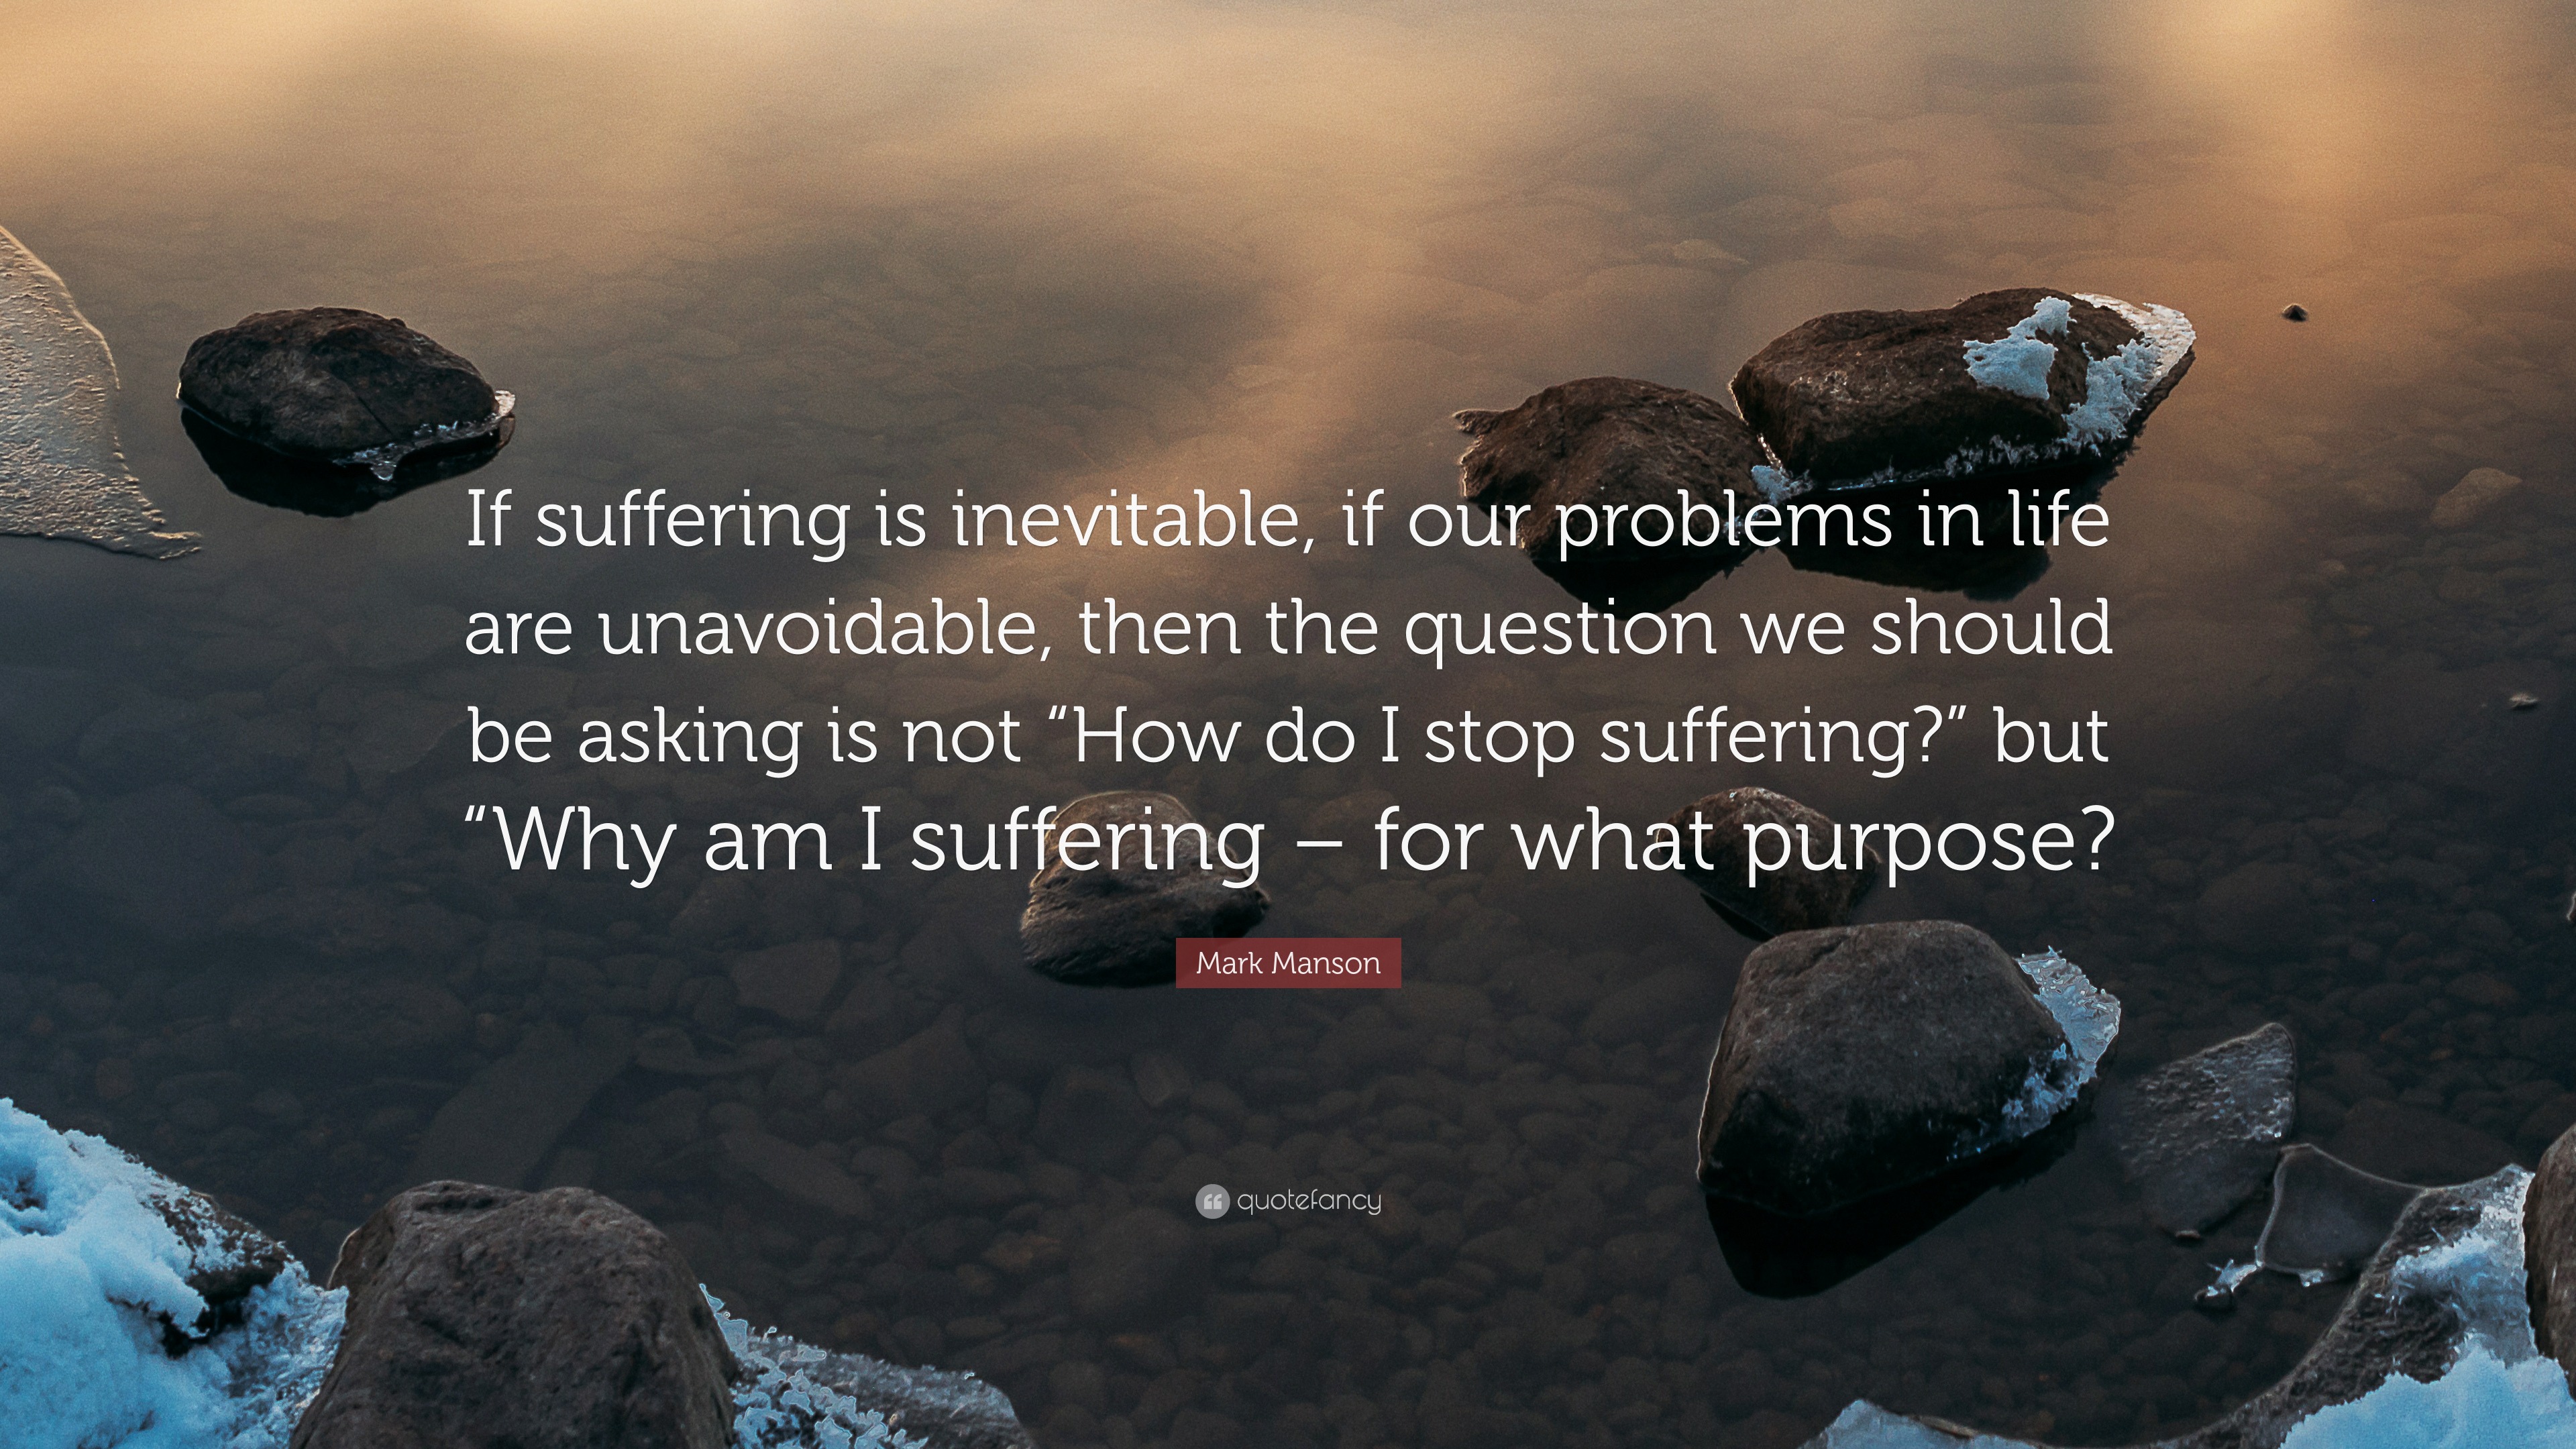 Mark Manson Quote: “If suffering is inevitable, if our problems in life are  unavoidable, then the question we should be asking is not “How d”